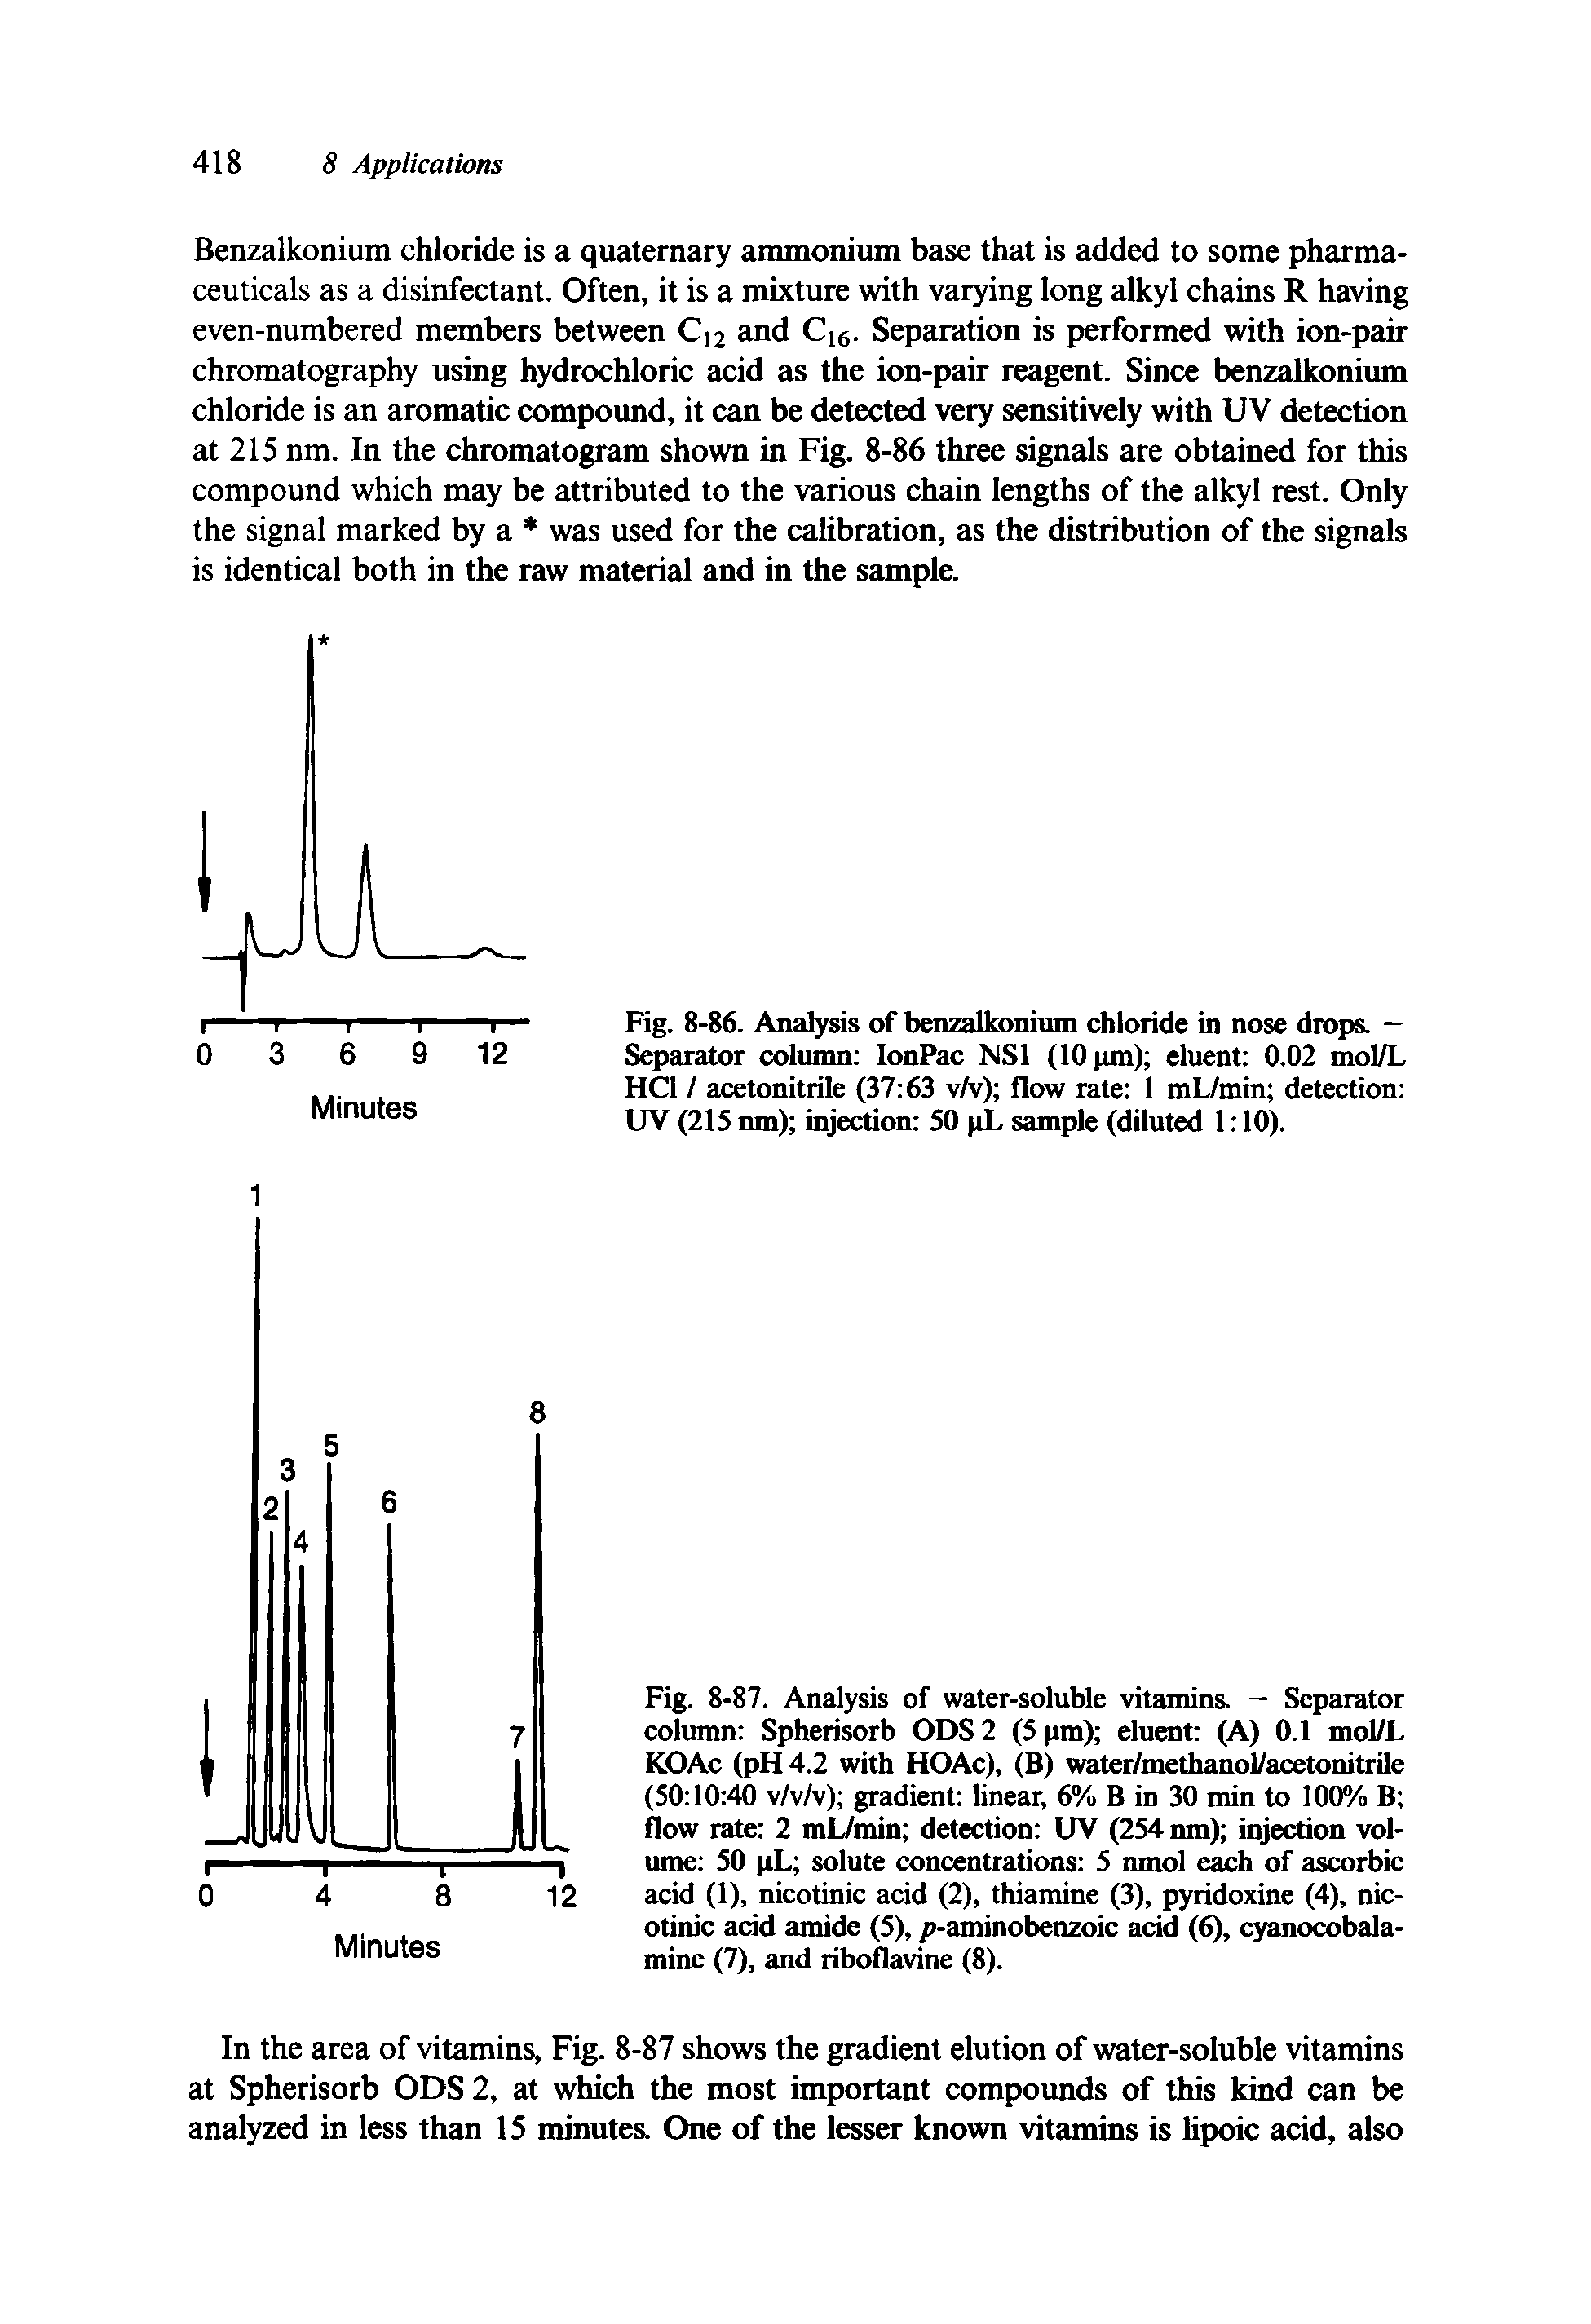 Fig. 8-87. Analysis of water-soluble vitamins. - Separator column Spherisorb ODS 2 (5 pm) eluent (A) 0.1 mol/L KOAc (pH 4.2 with HOAc), (B) water/methanol/acetonitrile (50 10 40 v/v/v) gradient linear, 6% B in 30 min to 100% B flow rate 2 mL/min detection UV (254 nm) injection volume 50 pL solute concentrations 5 nmol each of ascorbic acid (1), nicotinic acid (2), thiamine (3), pyridoxine (4), nicotinic add amide (5), p-aminobenzoic add (6), cyanocobala-mine (7), and riboflavine (8).